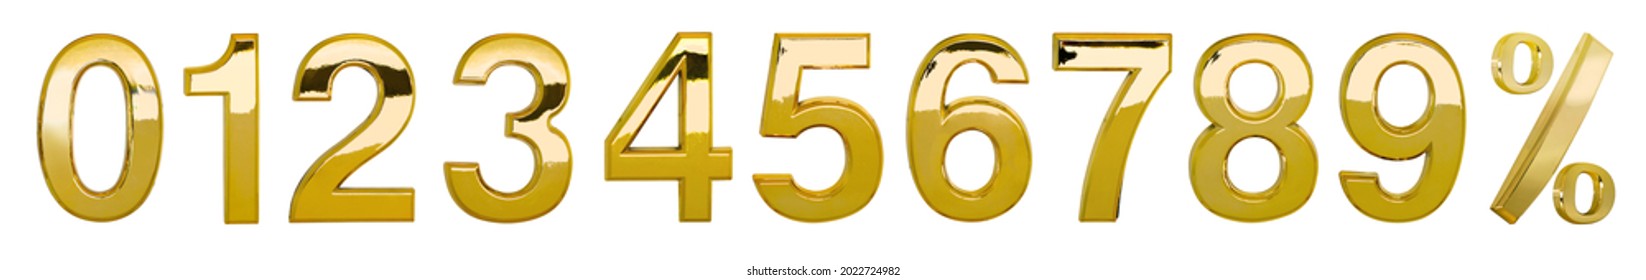 Three-dimensional arabic numerals 1, 2, 3, 4, 5, 6, 7, 8, 9, 0, % Gold-plated metal and percentage mark Photo isolated on white background. This has clipping path.                            